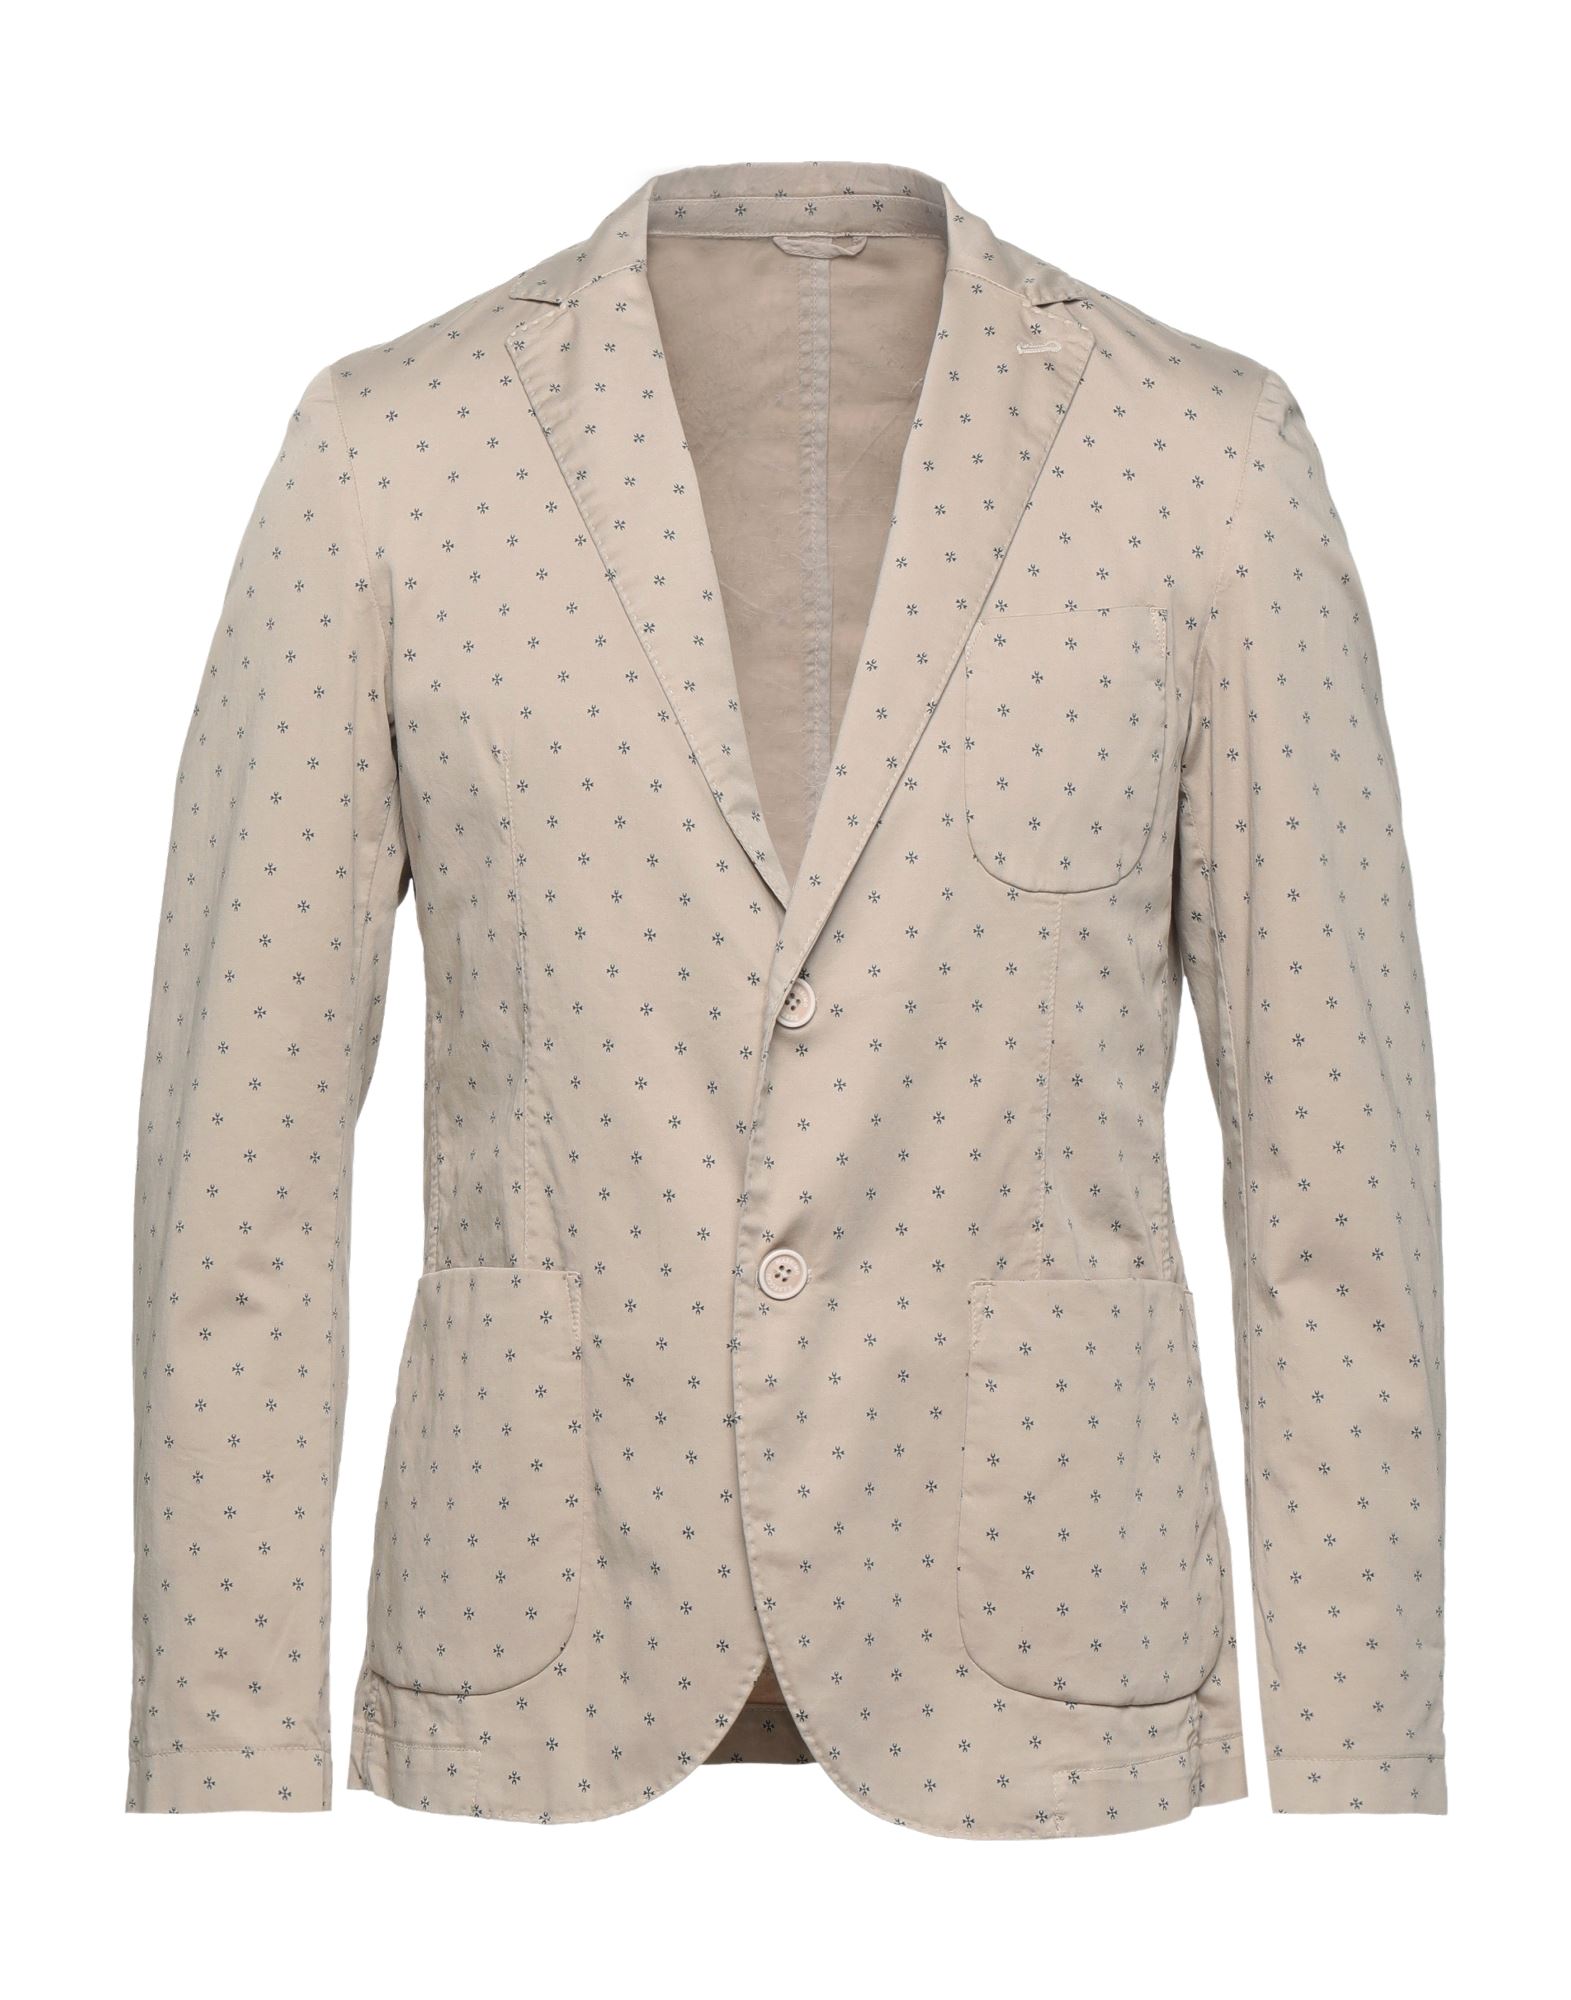 Massimo Rebecchi Suit Jackets In Grey